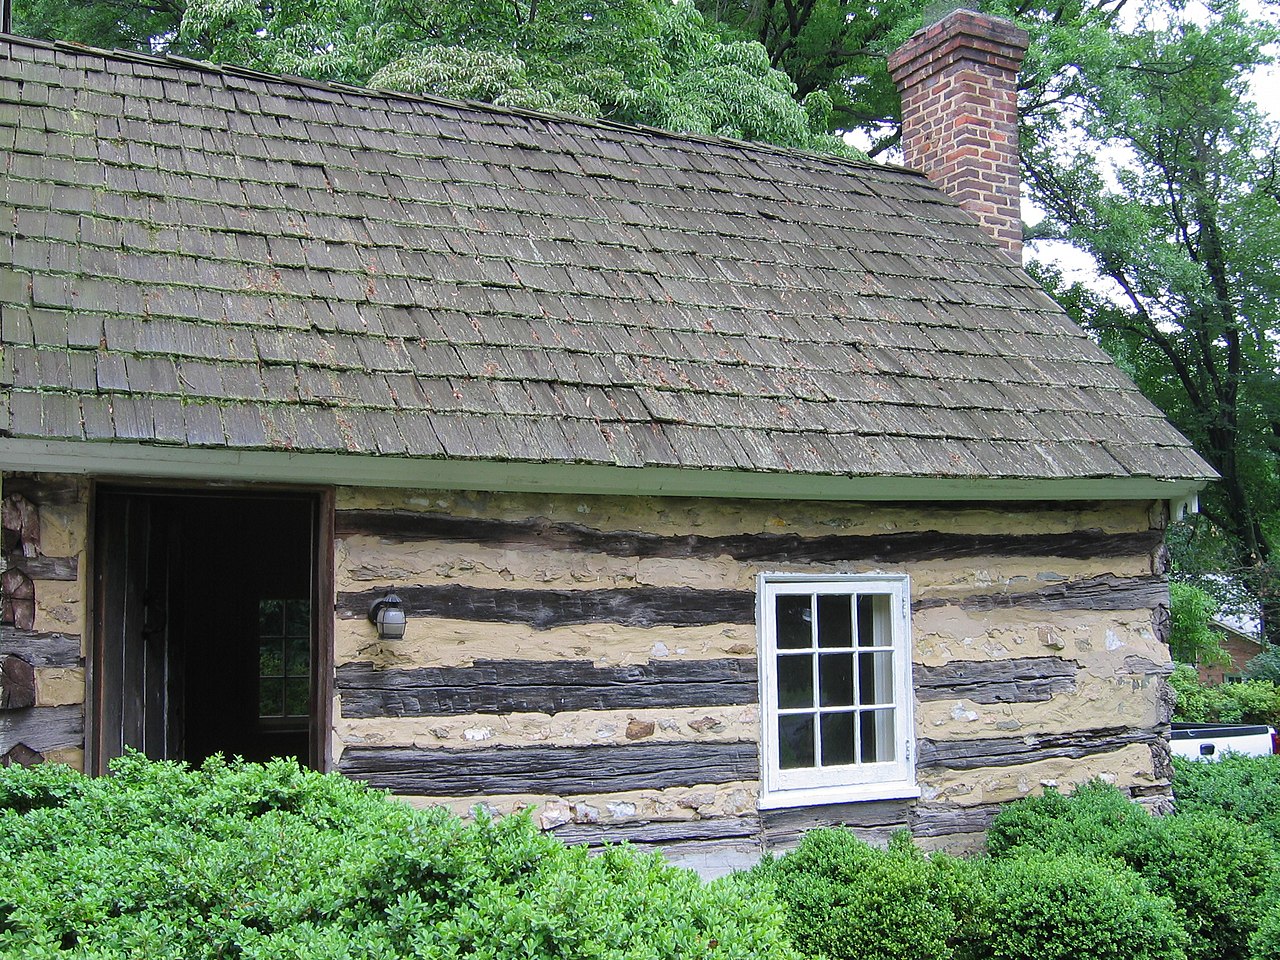 File:Uncle toms cabin2.jpg - Wikimedia Commons